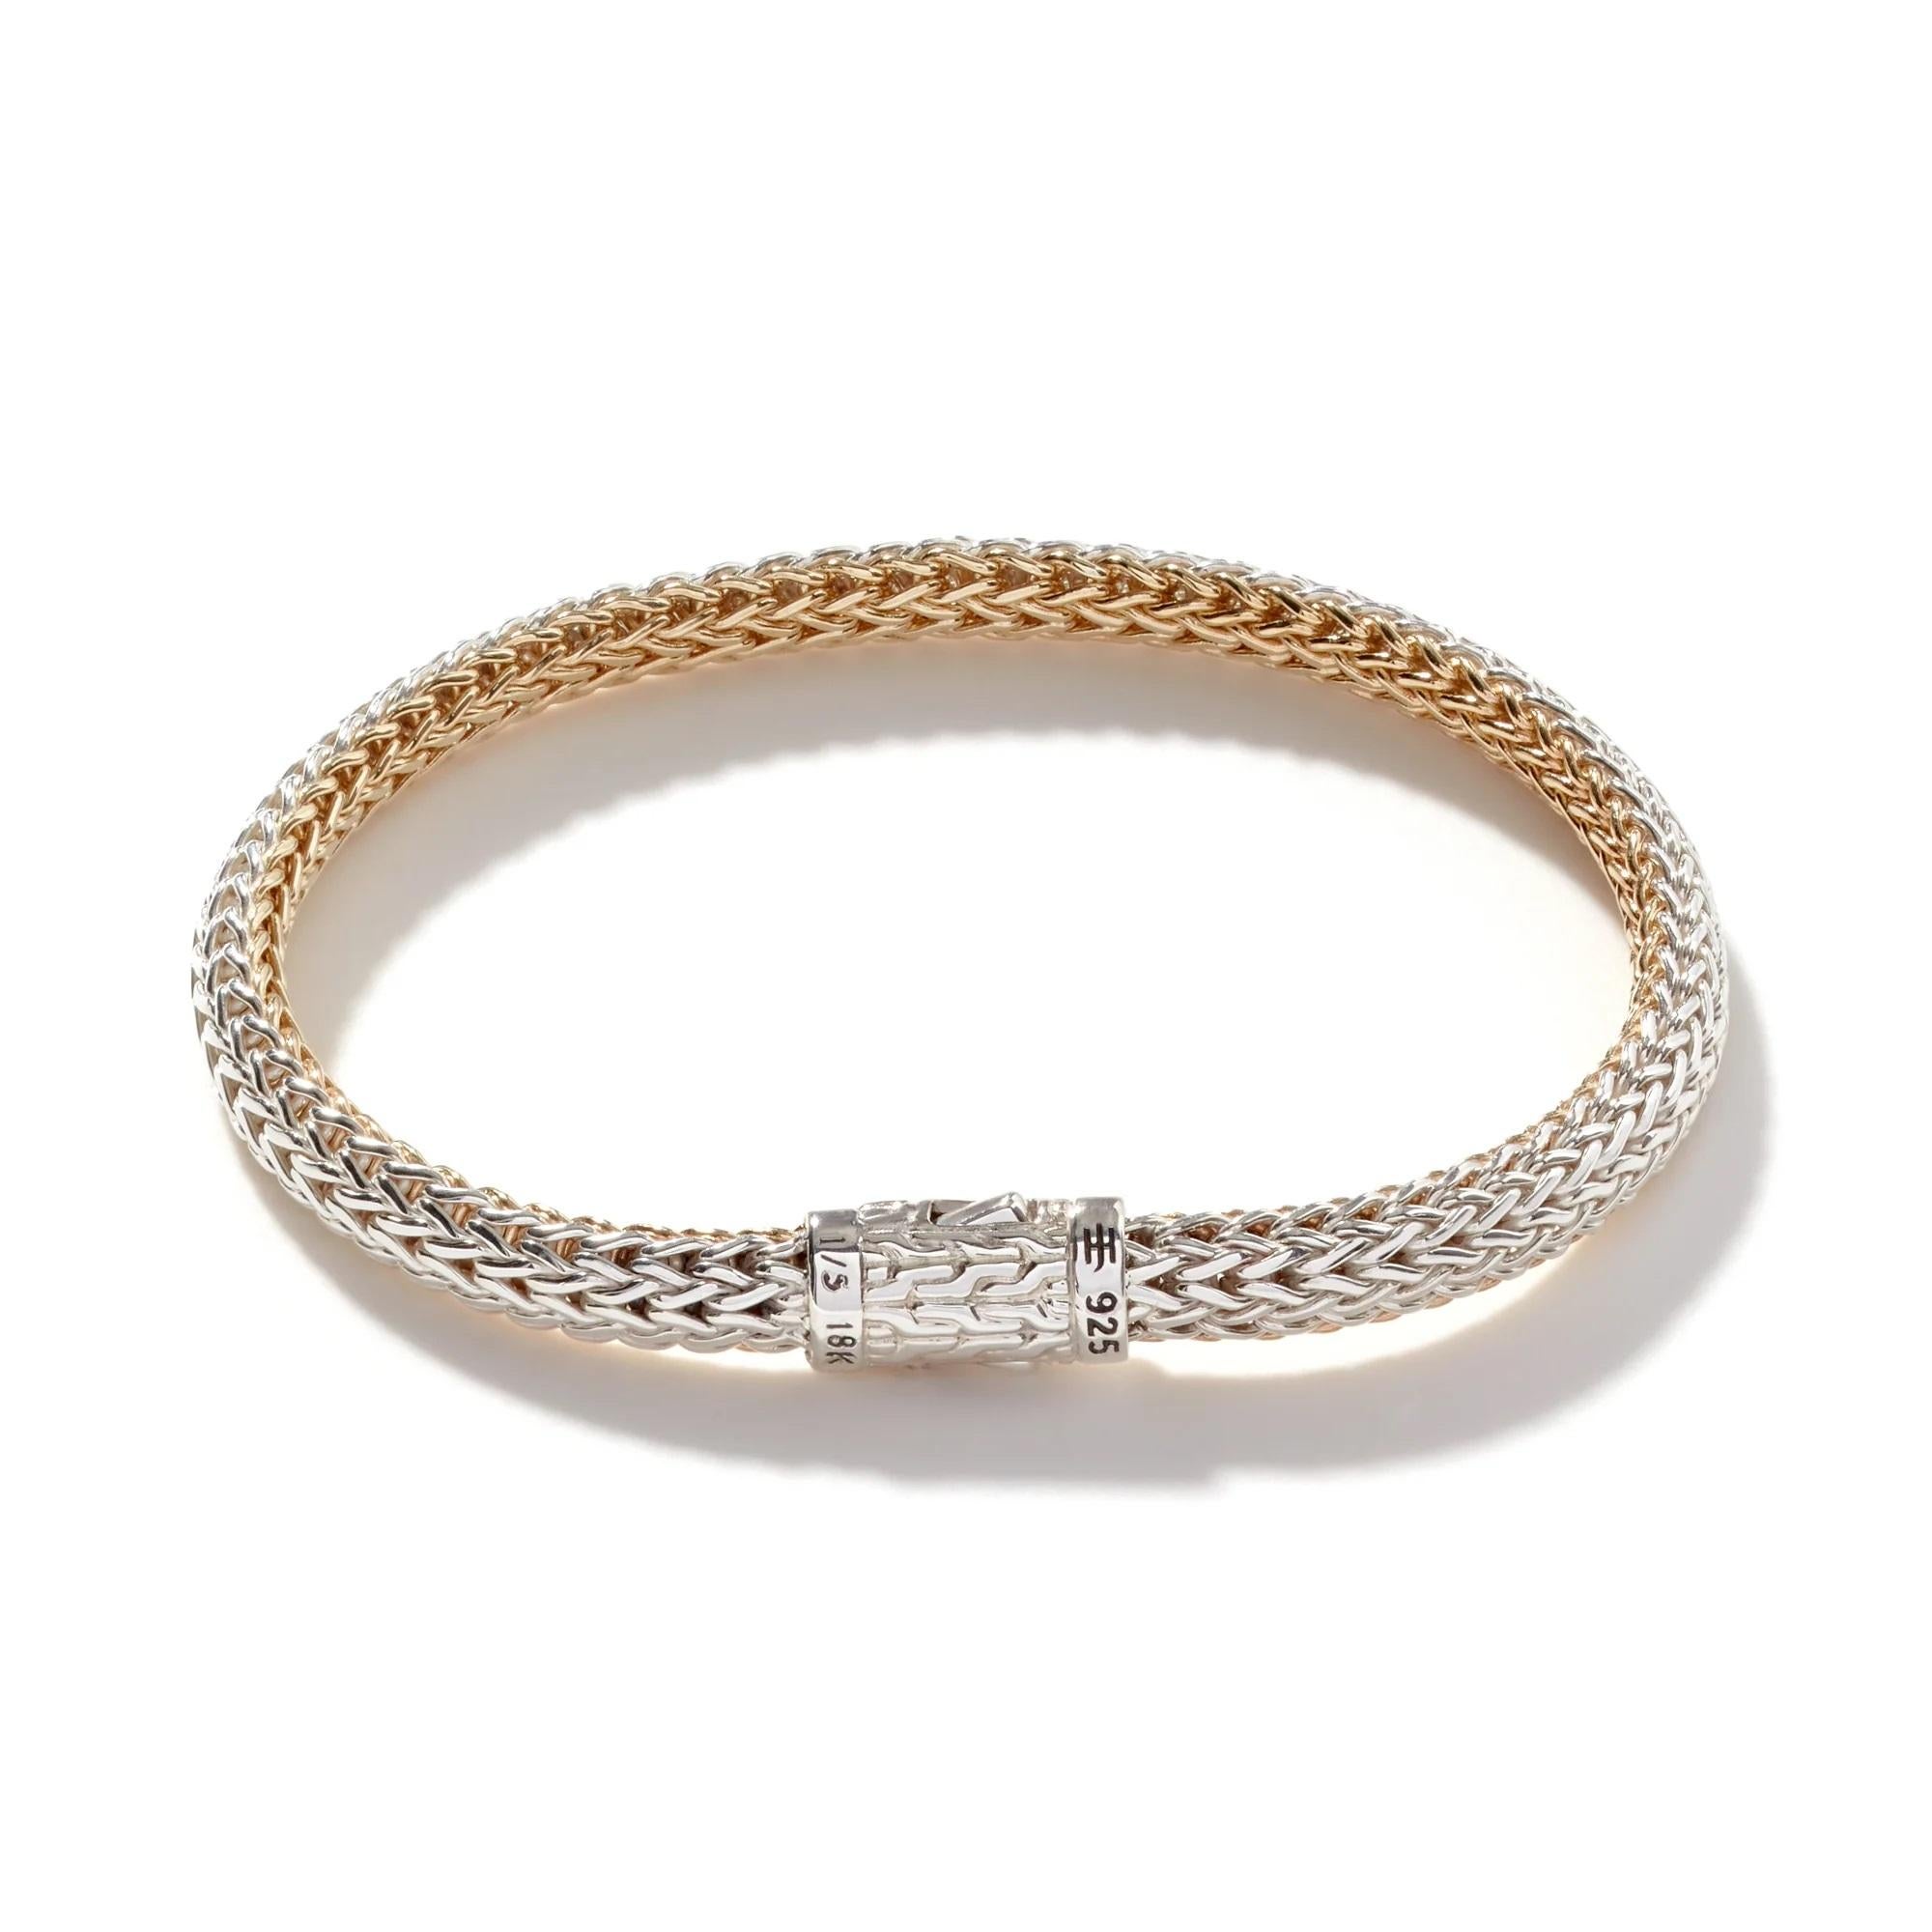 BRACELET TYPE: Chain
MATERIAL: 18K Yellow Gold Plated, Sterling Silver
GENDER: Ladies
SIZE: M
COLLECTION: Classic Chain
PRODUCT TYPE: Bracelet
MODEL NUMBER: BZ96RVXUM